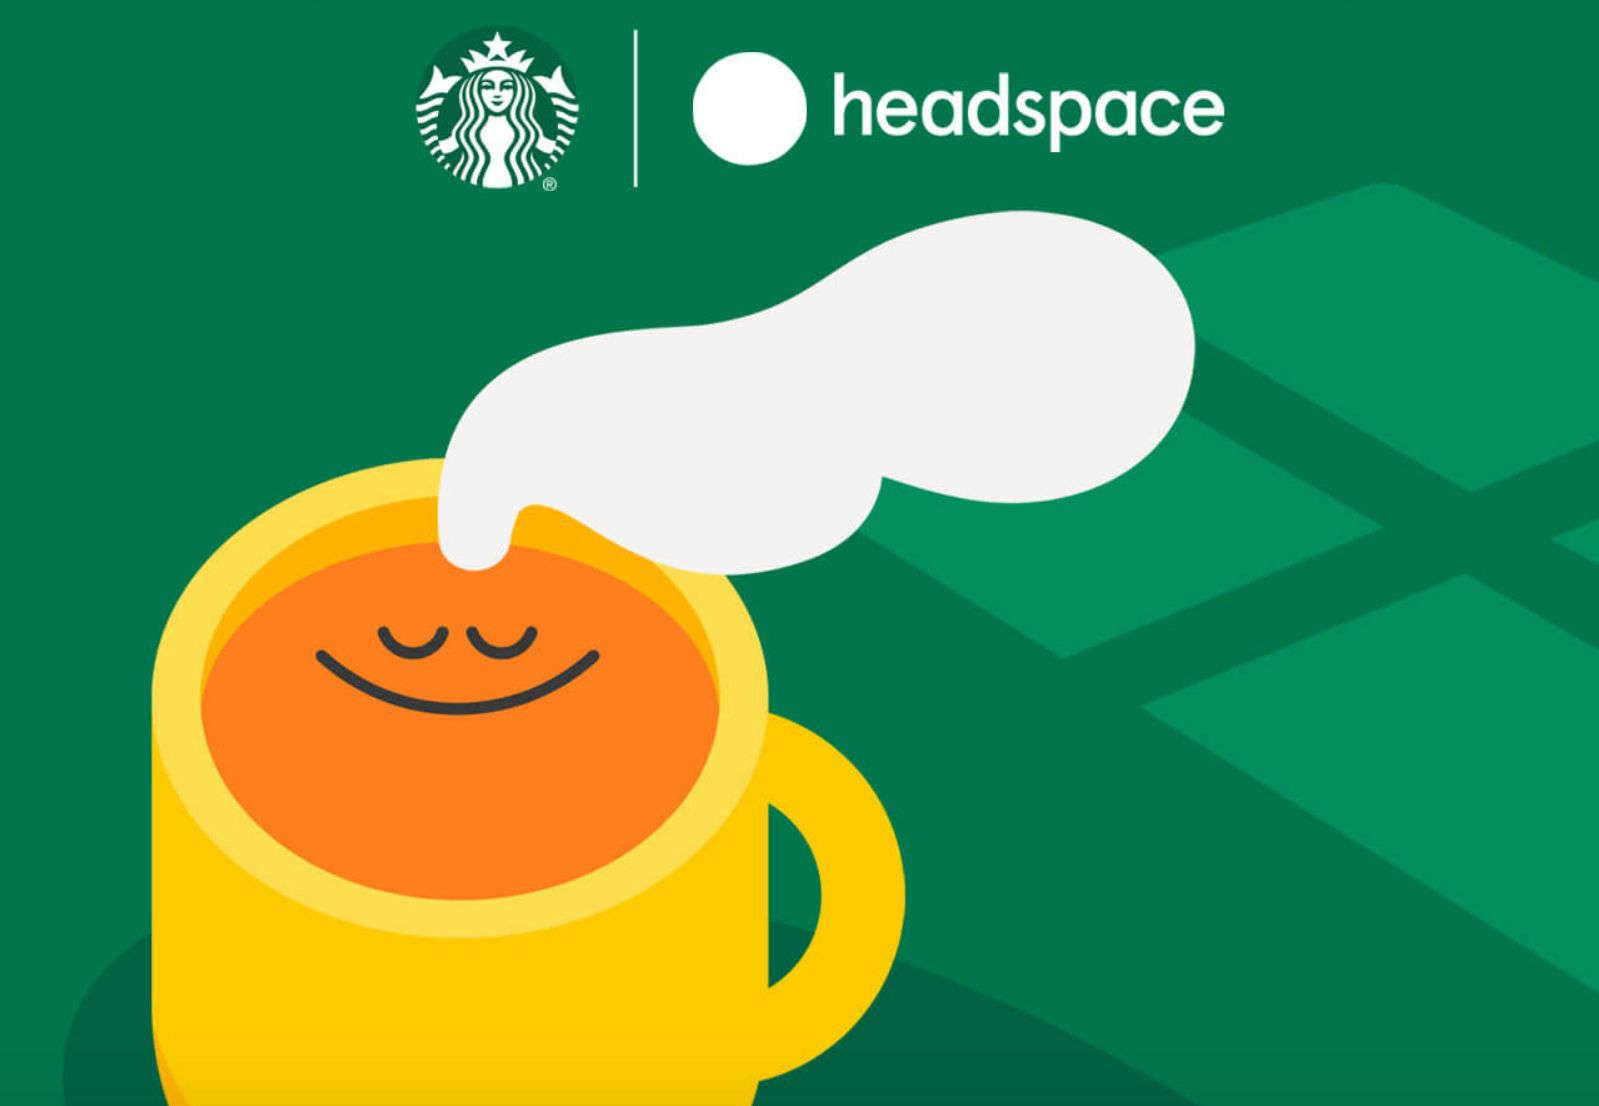 Starbucks Has Partnered with Headspace to Bring Rewards Members 5 Free Guided Meditations